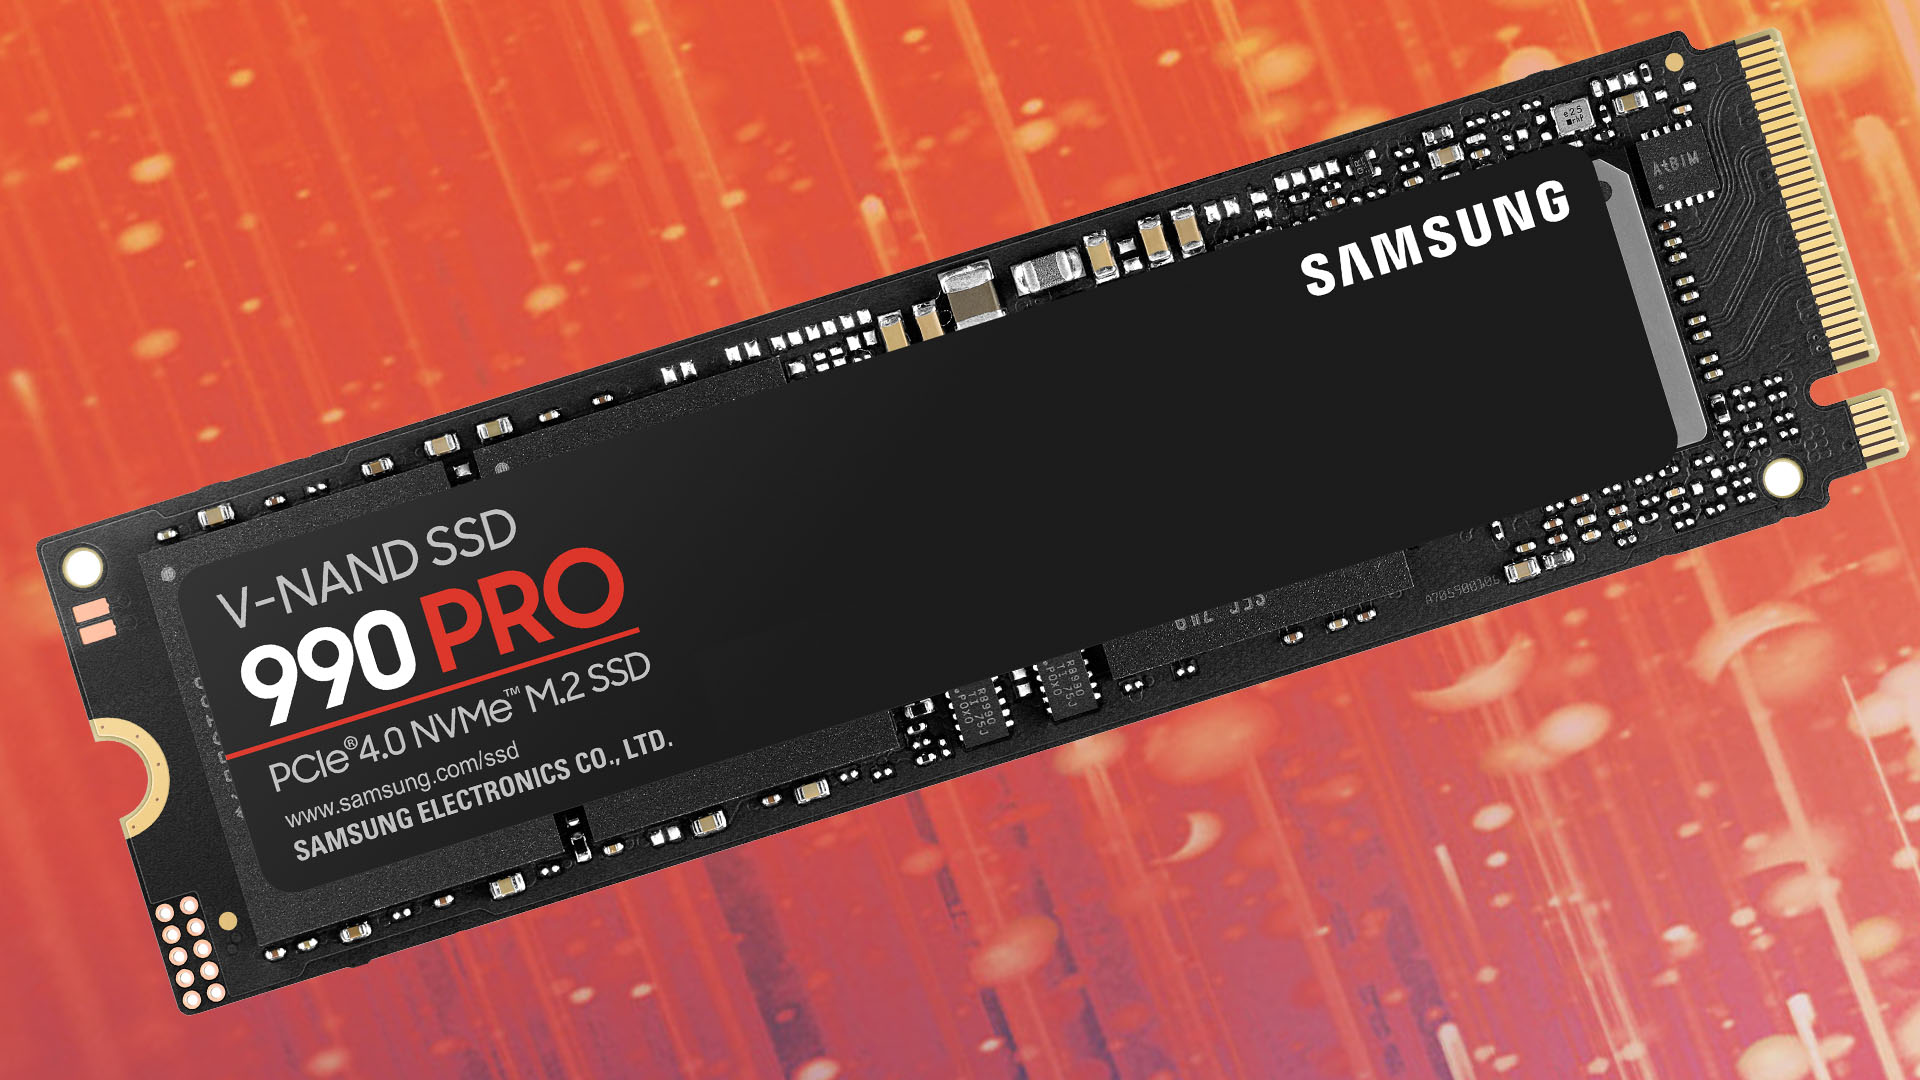 Samsung adds 4TB model to 990 Pro SSD lineup